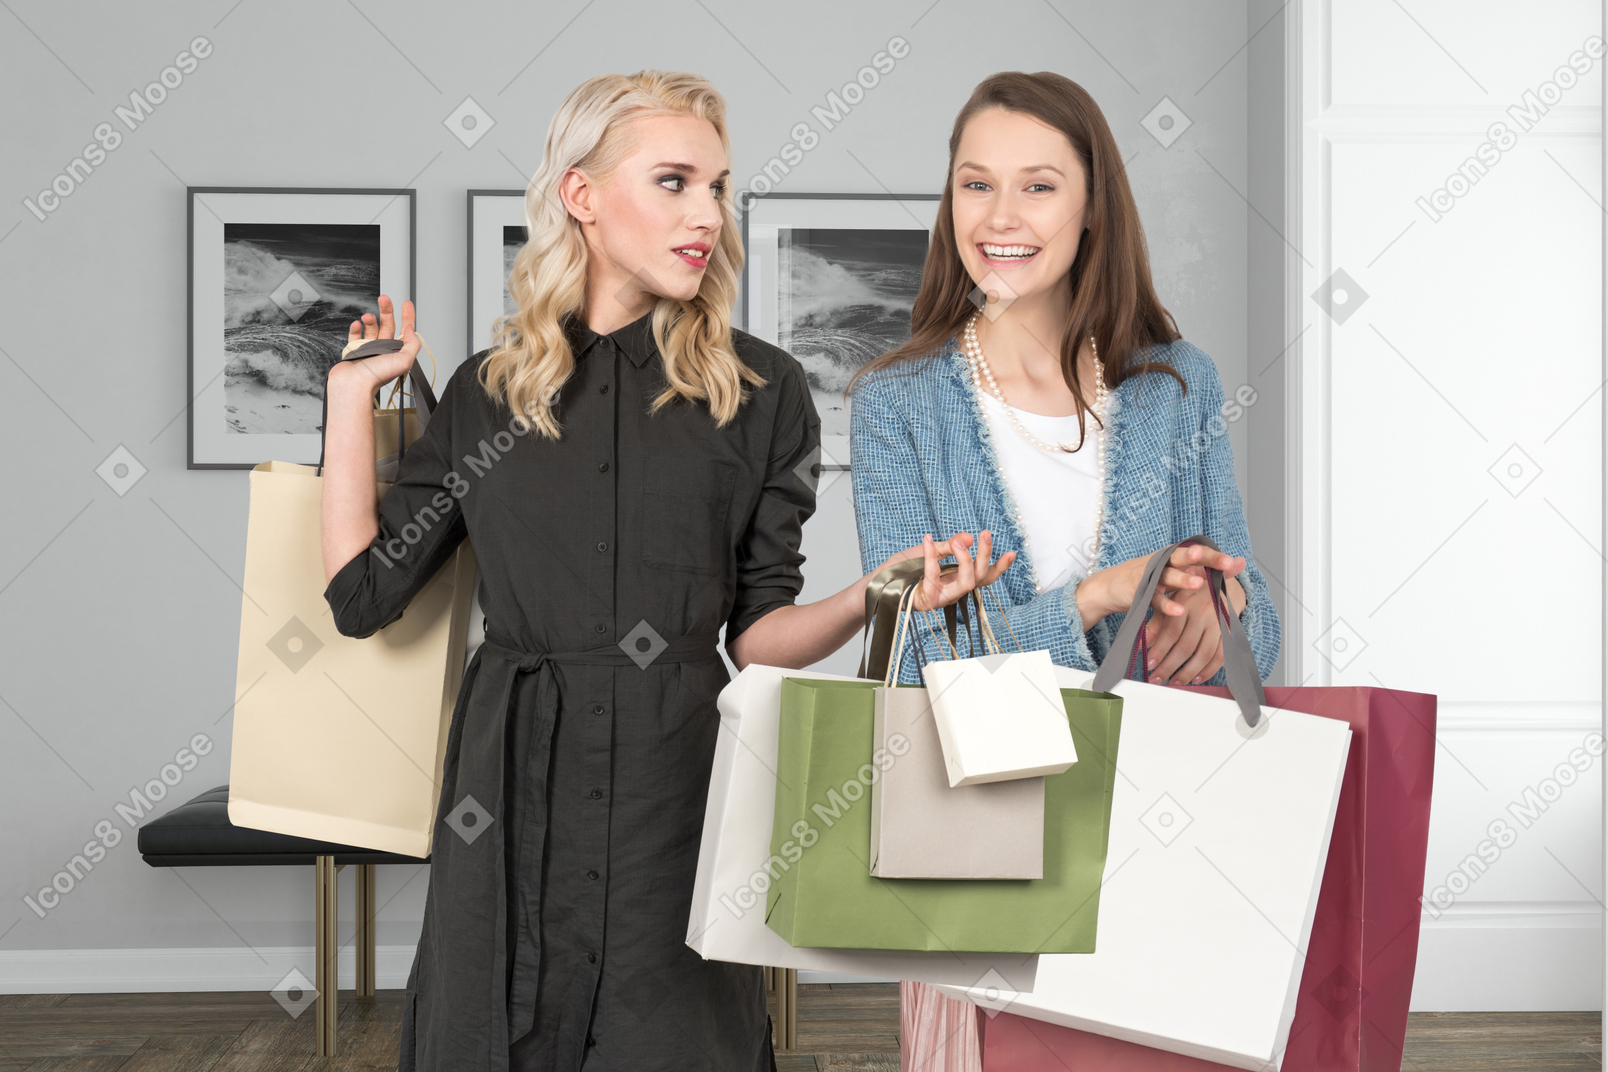 Woman and person holding shopping bags in a room